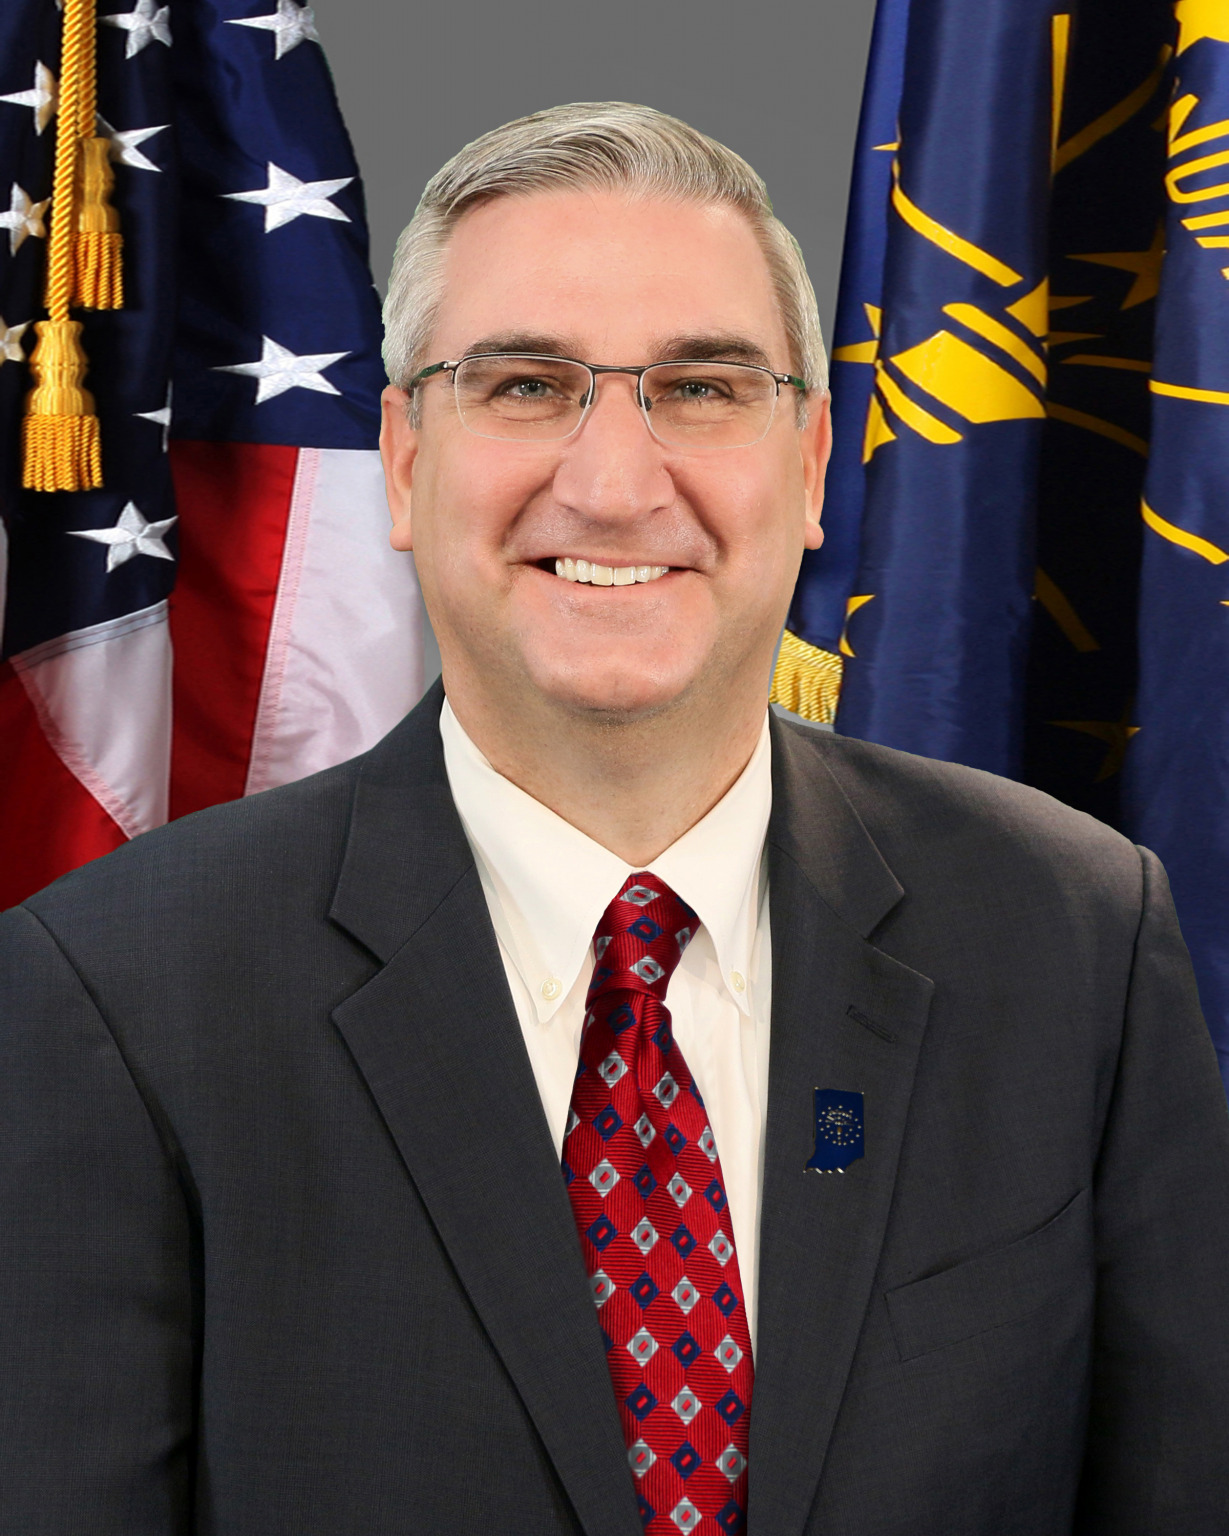 business-tax-cuts-top-holcomb-s-2022-agenda-indianapolis-business-journal